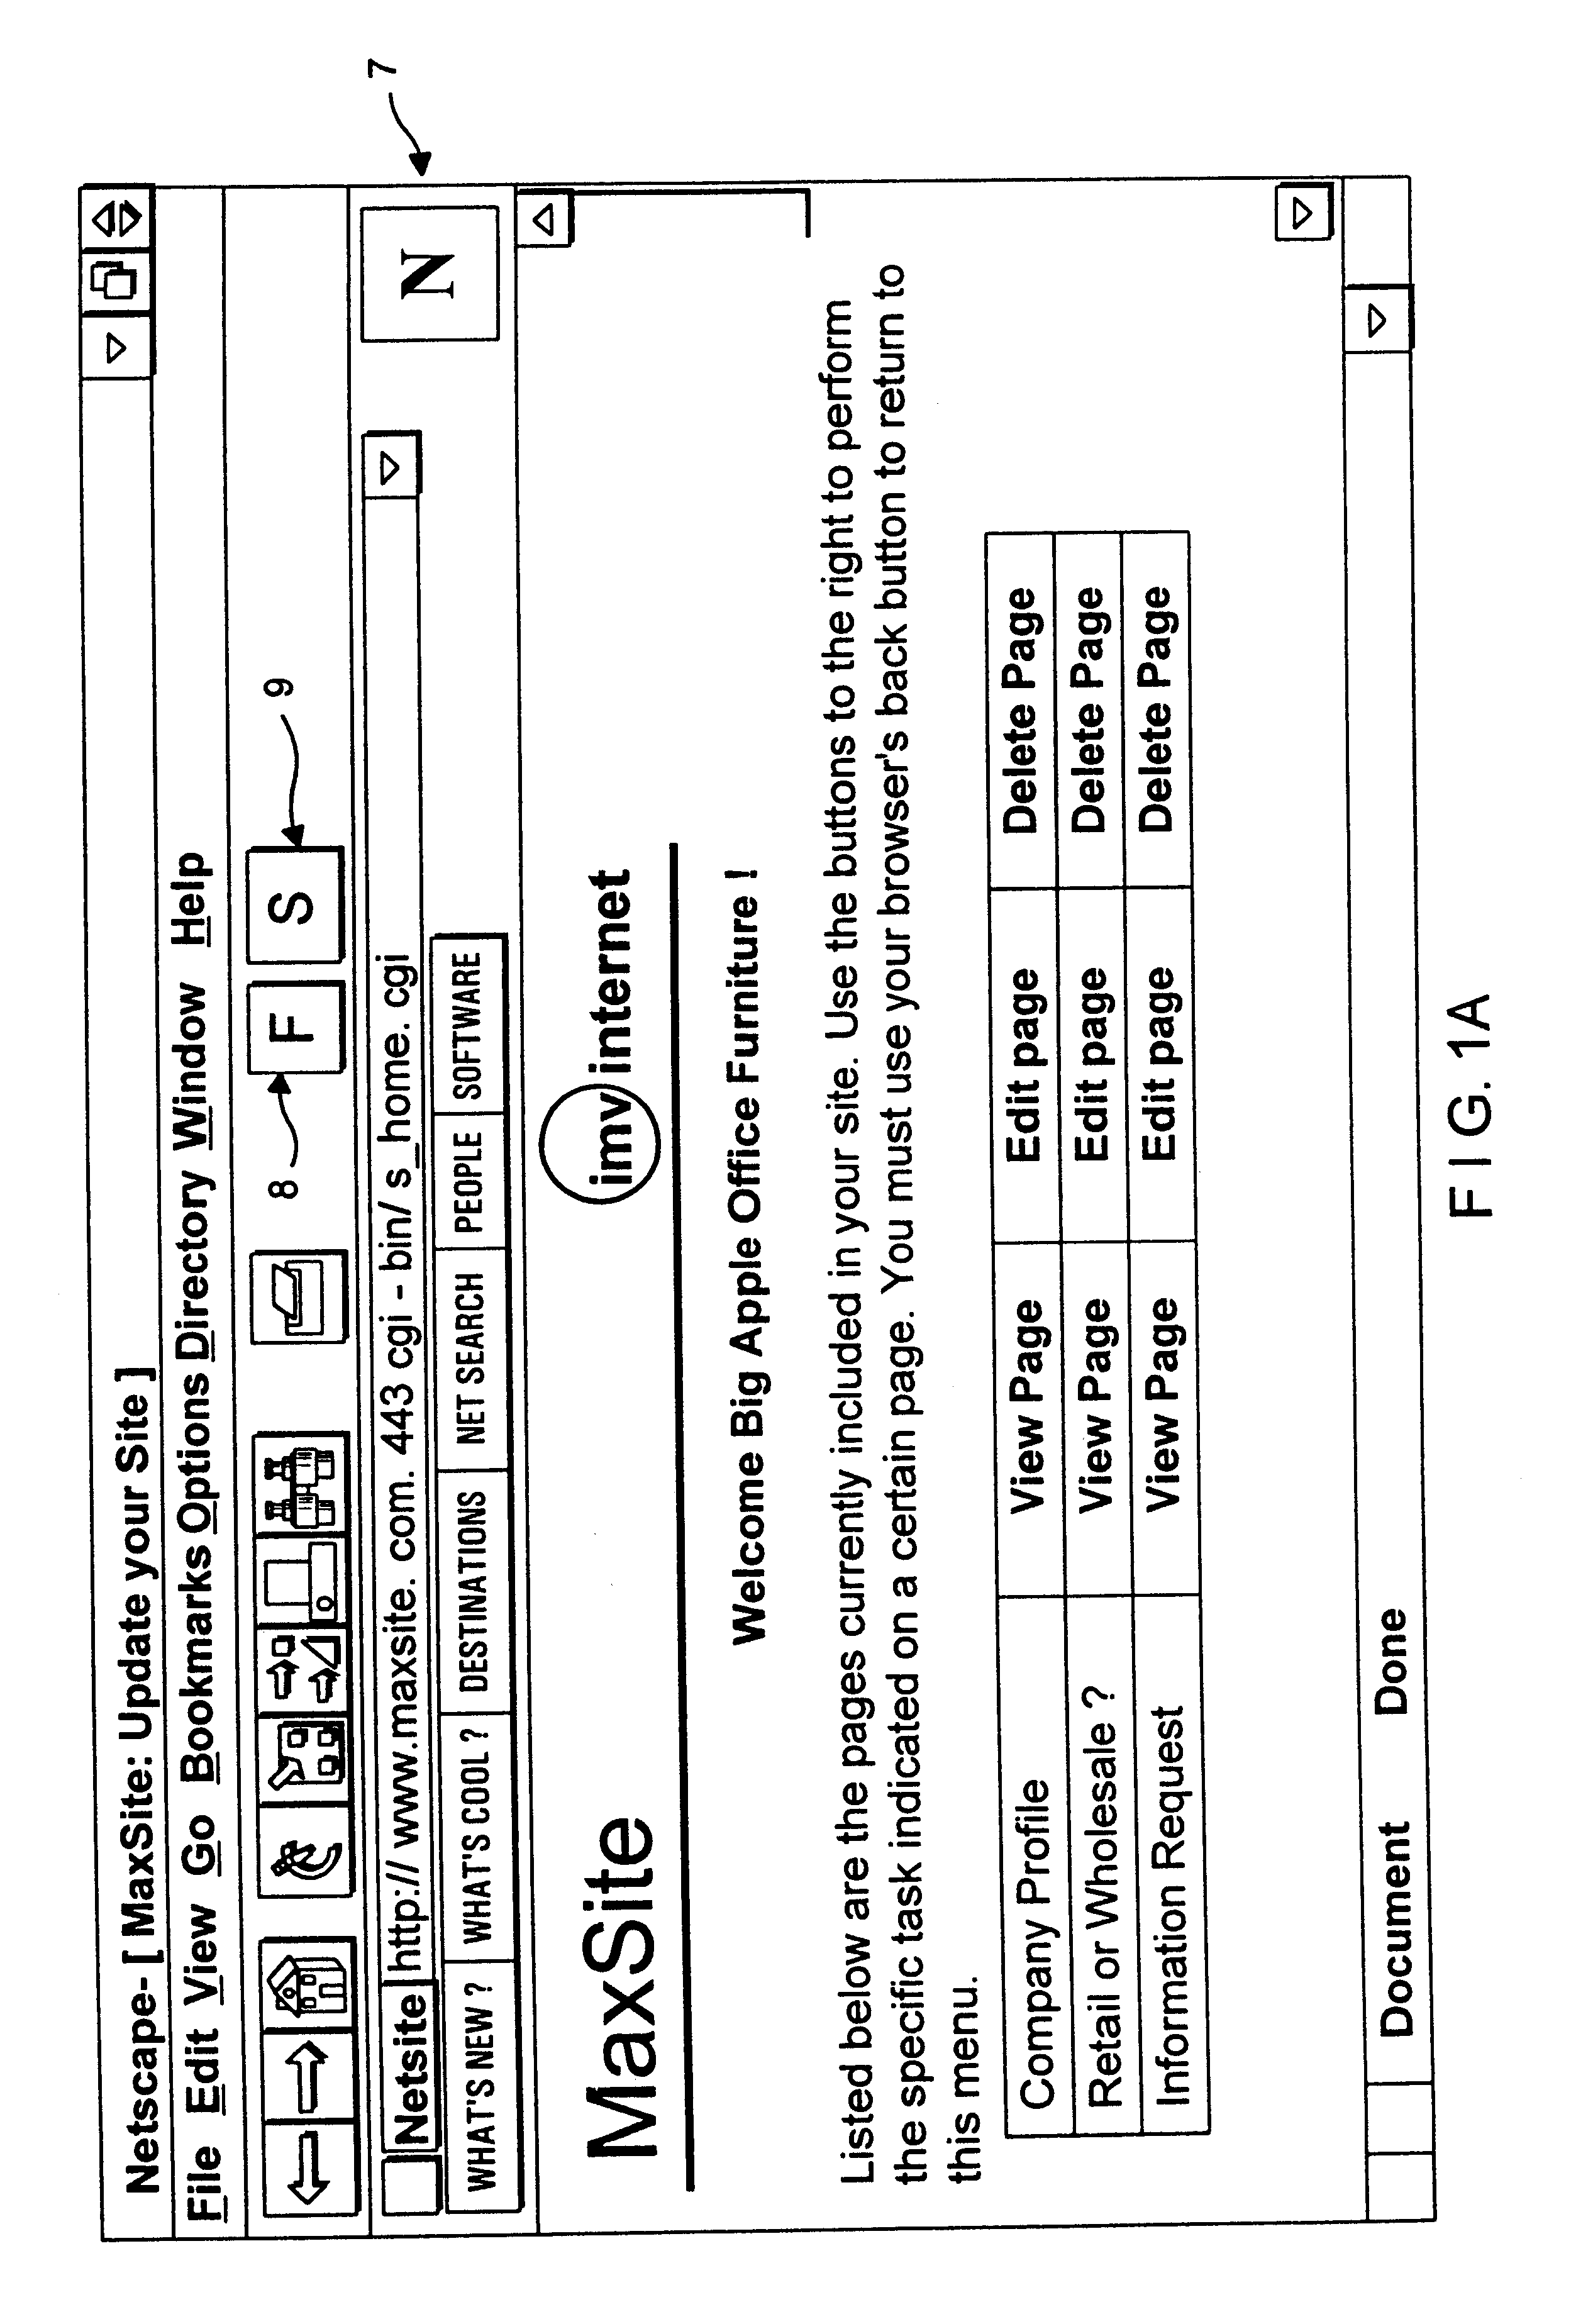 Method of and system for finding consumer product related information on the internet using automatic registration solicitation techniques to help create upn/tm/pd/url data links stored in an internet-based relational database server